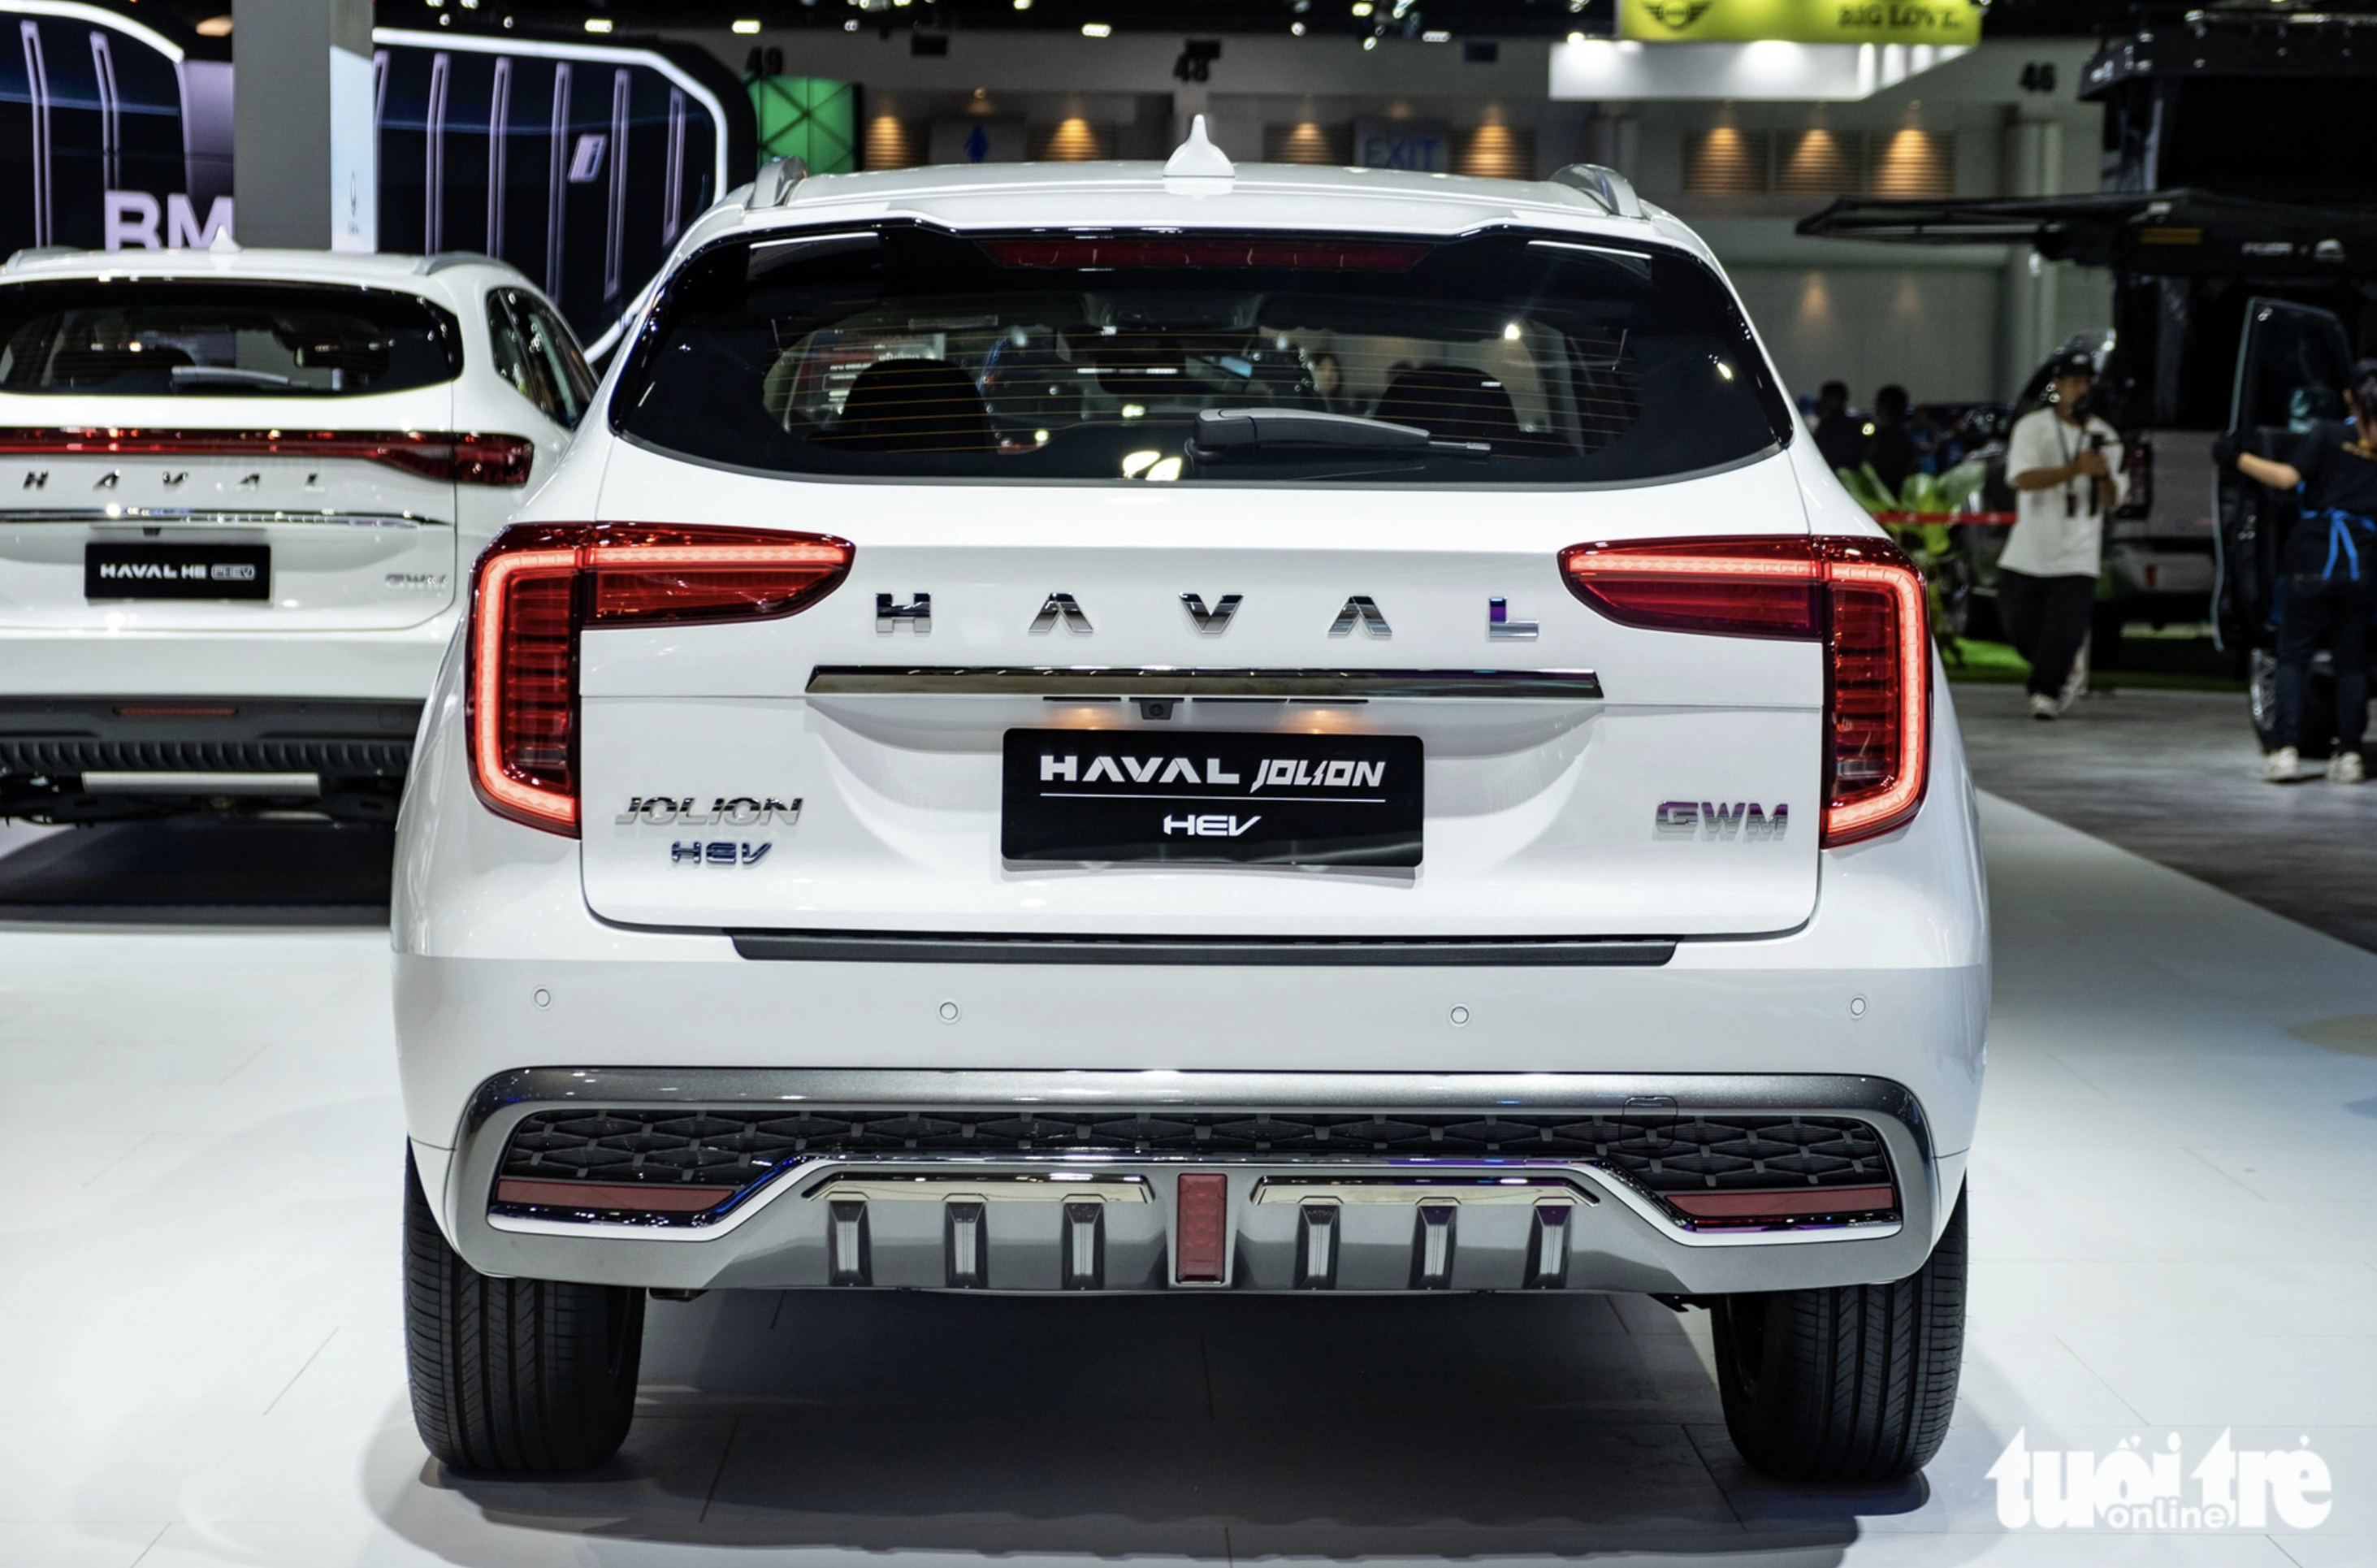 The Haval Jolion, with a 1.5-litre turbocharged engine that produces 190 horsepower and 375 Nm of torque, is predicted to be sold in Vietnam. Photo: Quoc Minh / Tuoi Tre